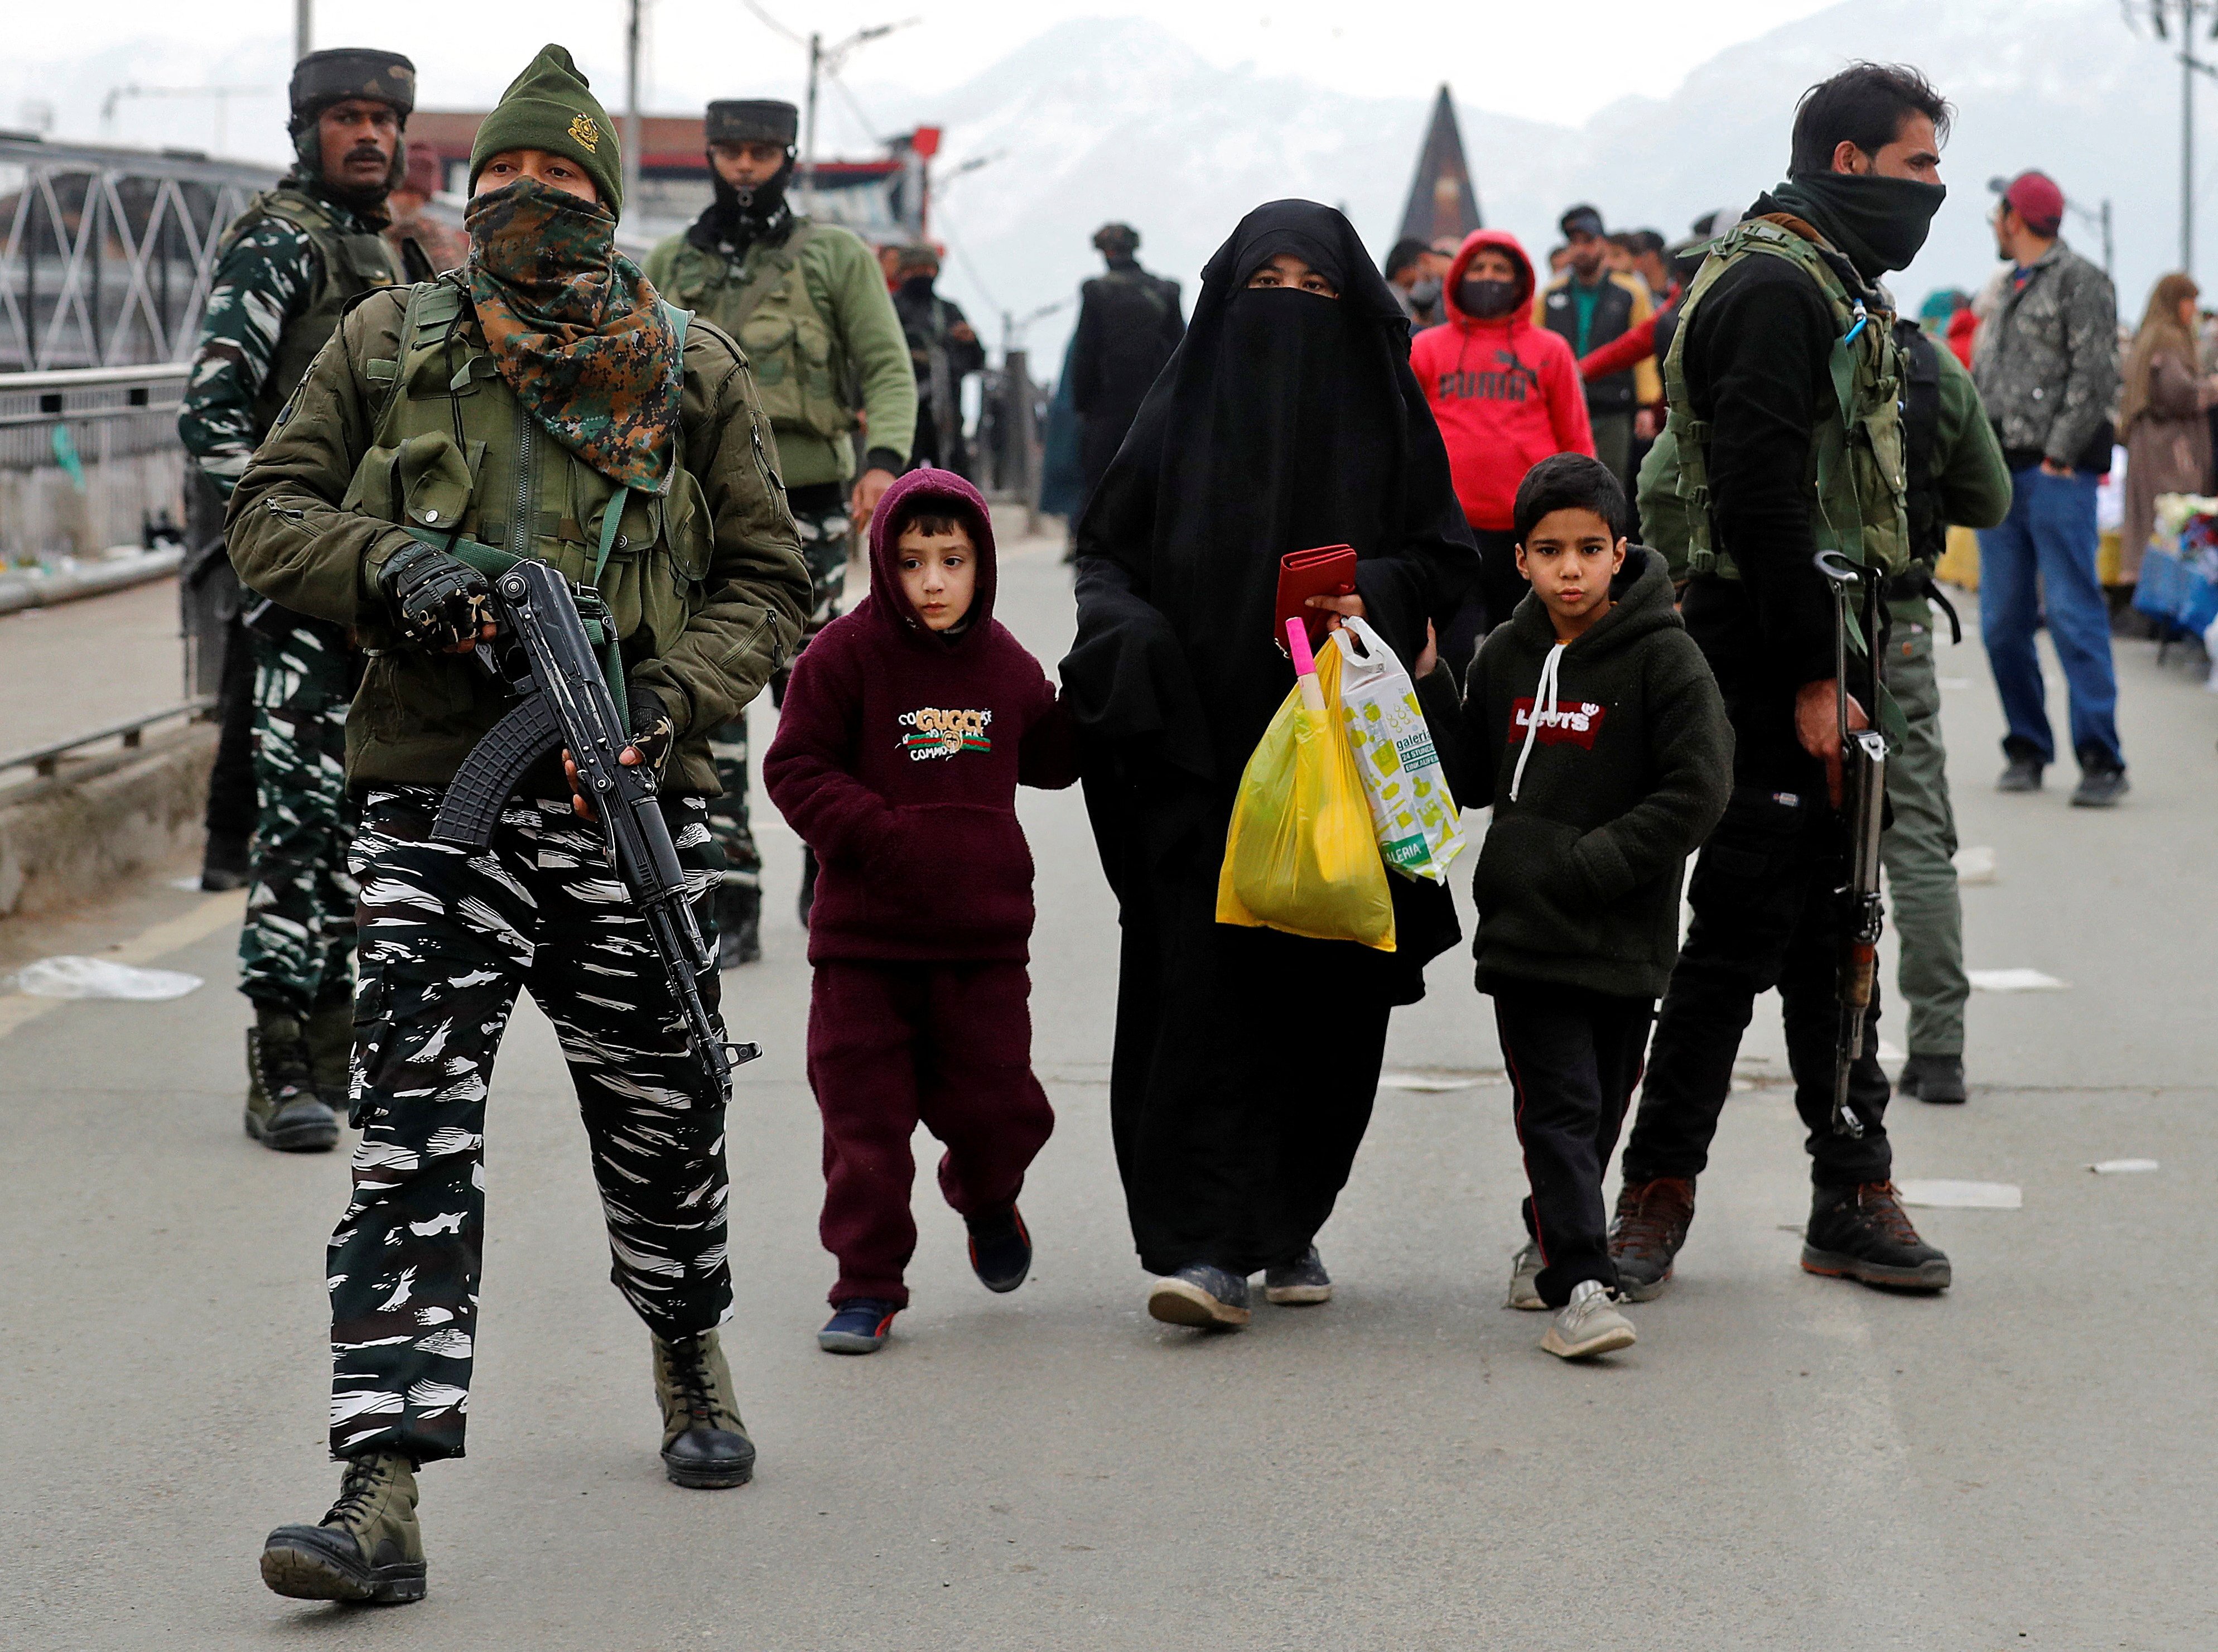 A veiled woman walks with her children past Indian security forces near the site of a grenade explosion in Srinagar, India on March 6. Photo: Reuters